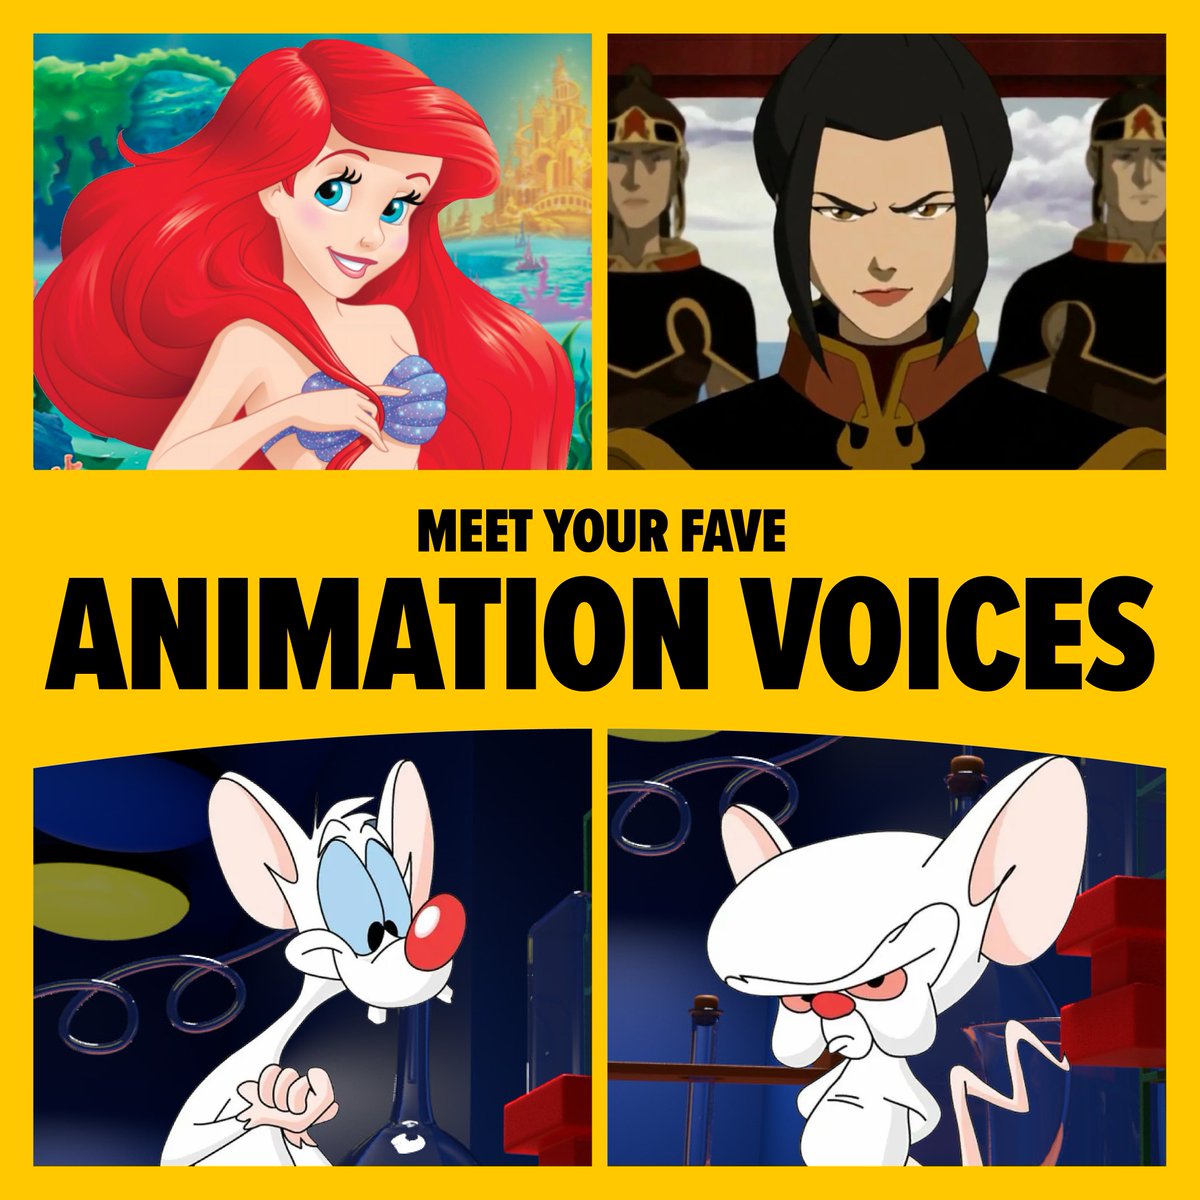 Looks like your fave animated characters have escaped to the real world. Meet the voices behind Miles Morales, Ahsoka, Captain Rex, Ariel, & more at #FANEXPOBoston this June: spr.ly/6015ZF4yB @thejodibenson @deebradleybaker @GreyDeLisle @yakkopinky @MAURICELAMARCHE